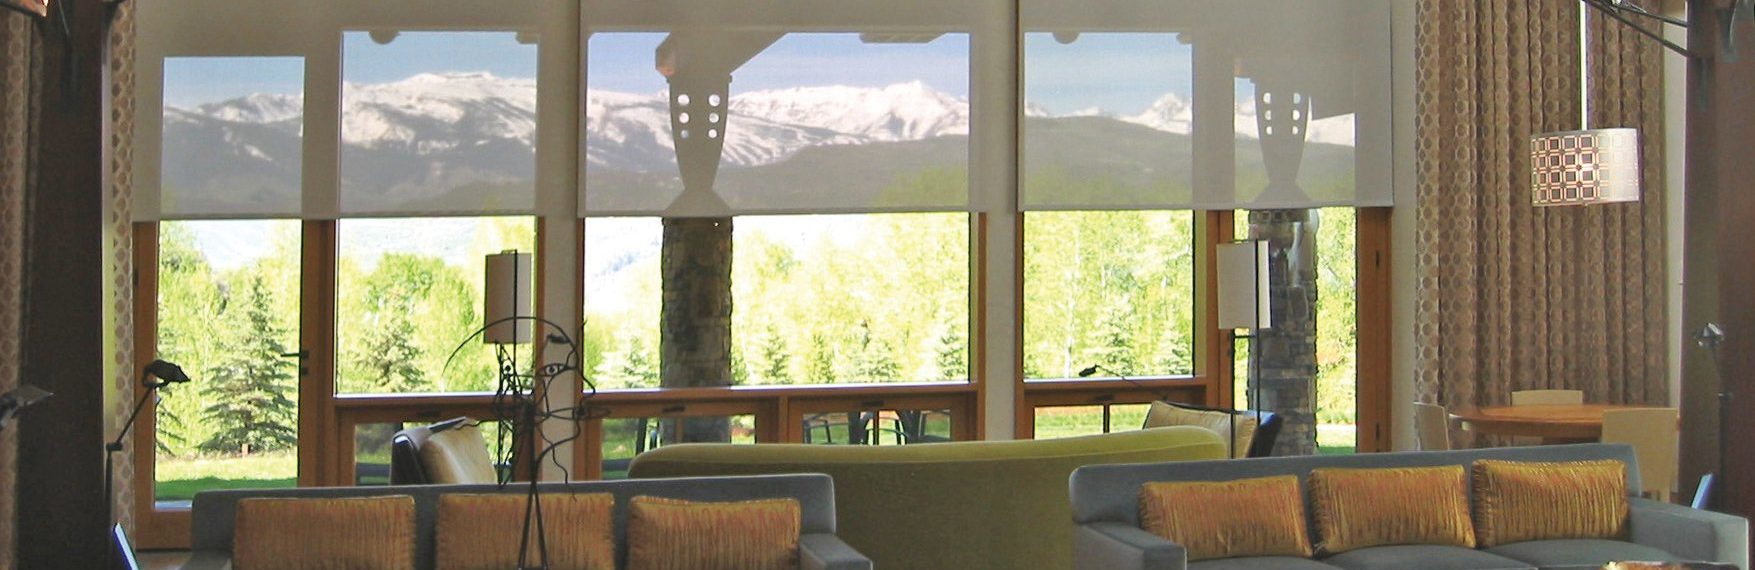 Insolroll Motorized Shades mountain view living room